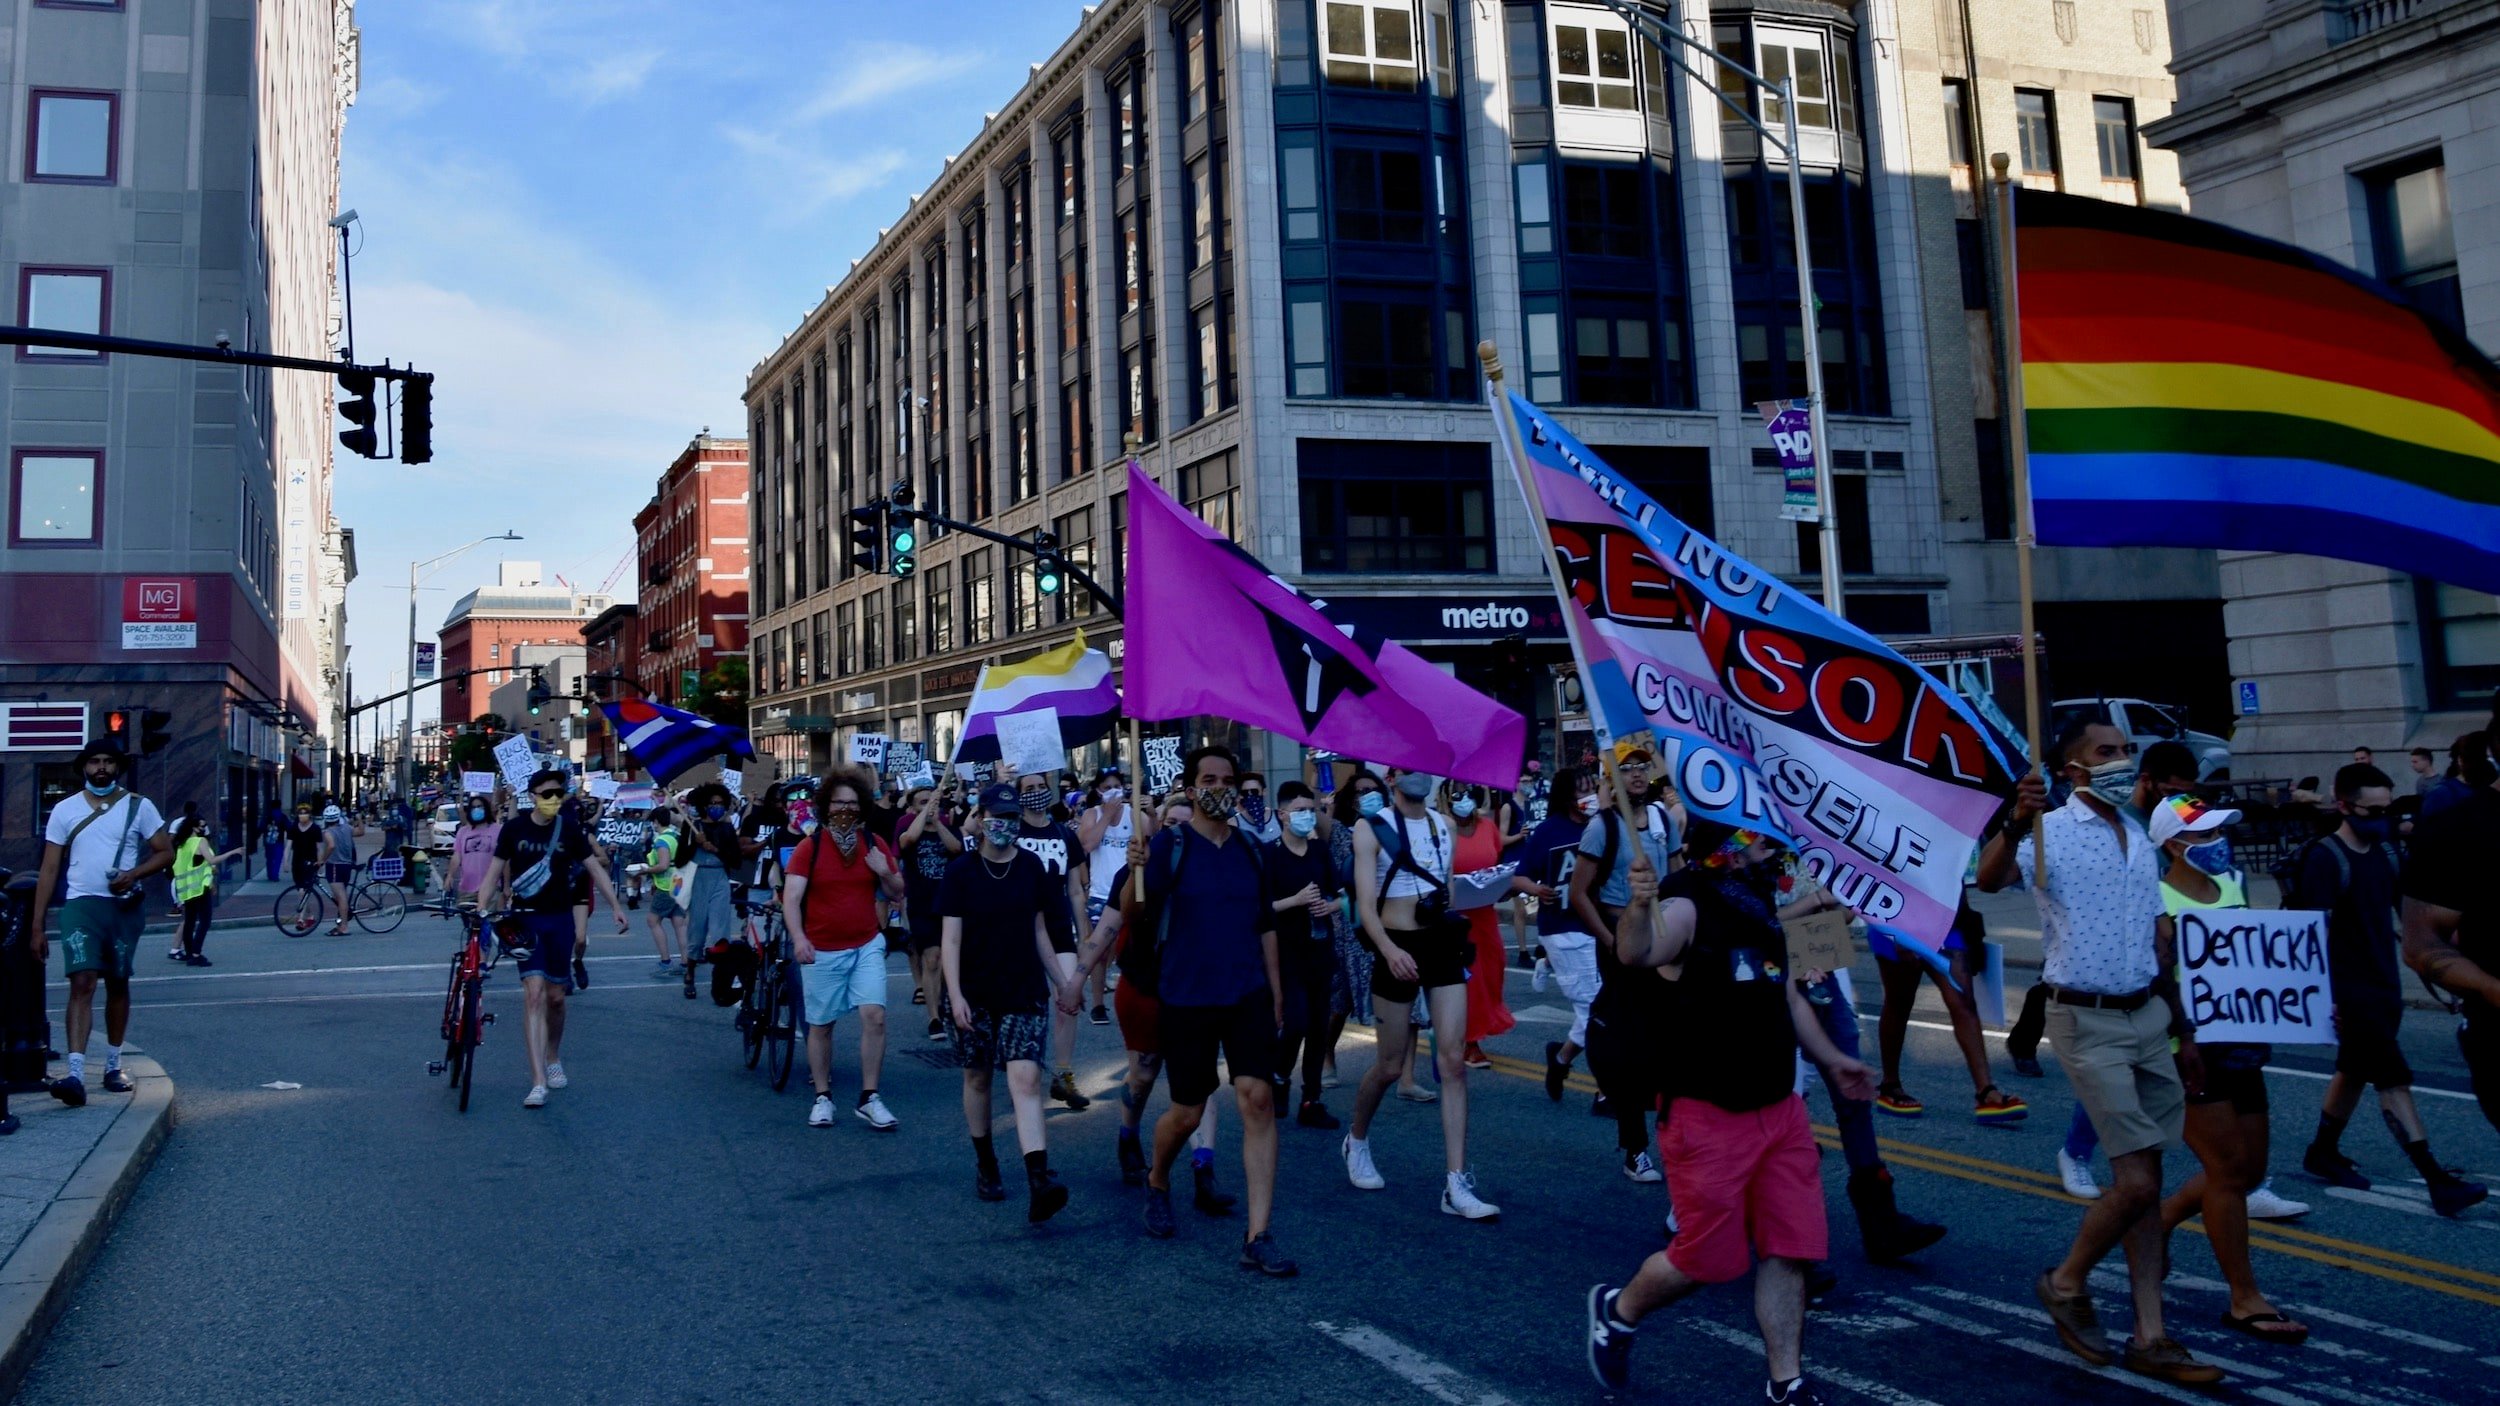 Rhode Island Pride 2020 Resistance and Resilience Rally for QTPOC